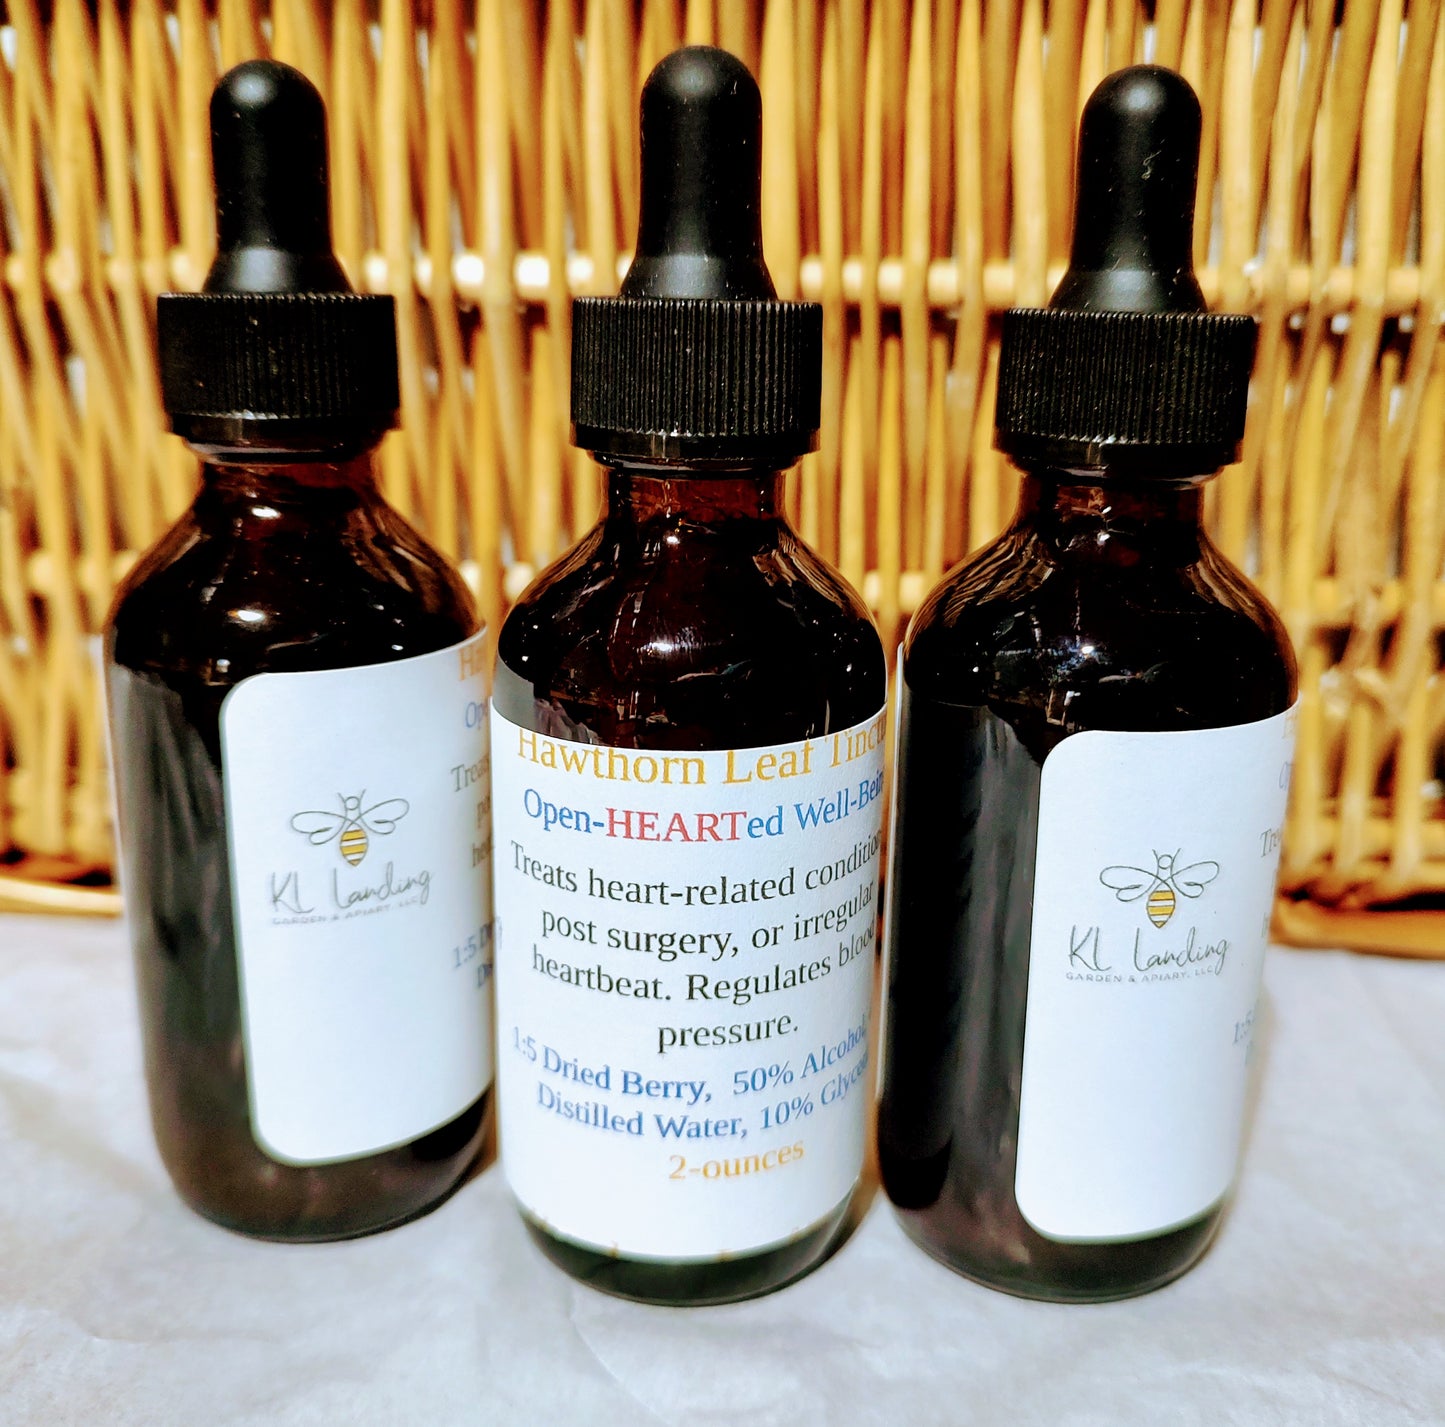 Hawthorn Leaf Tincture- Openhearted Well Being